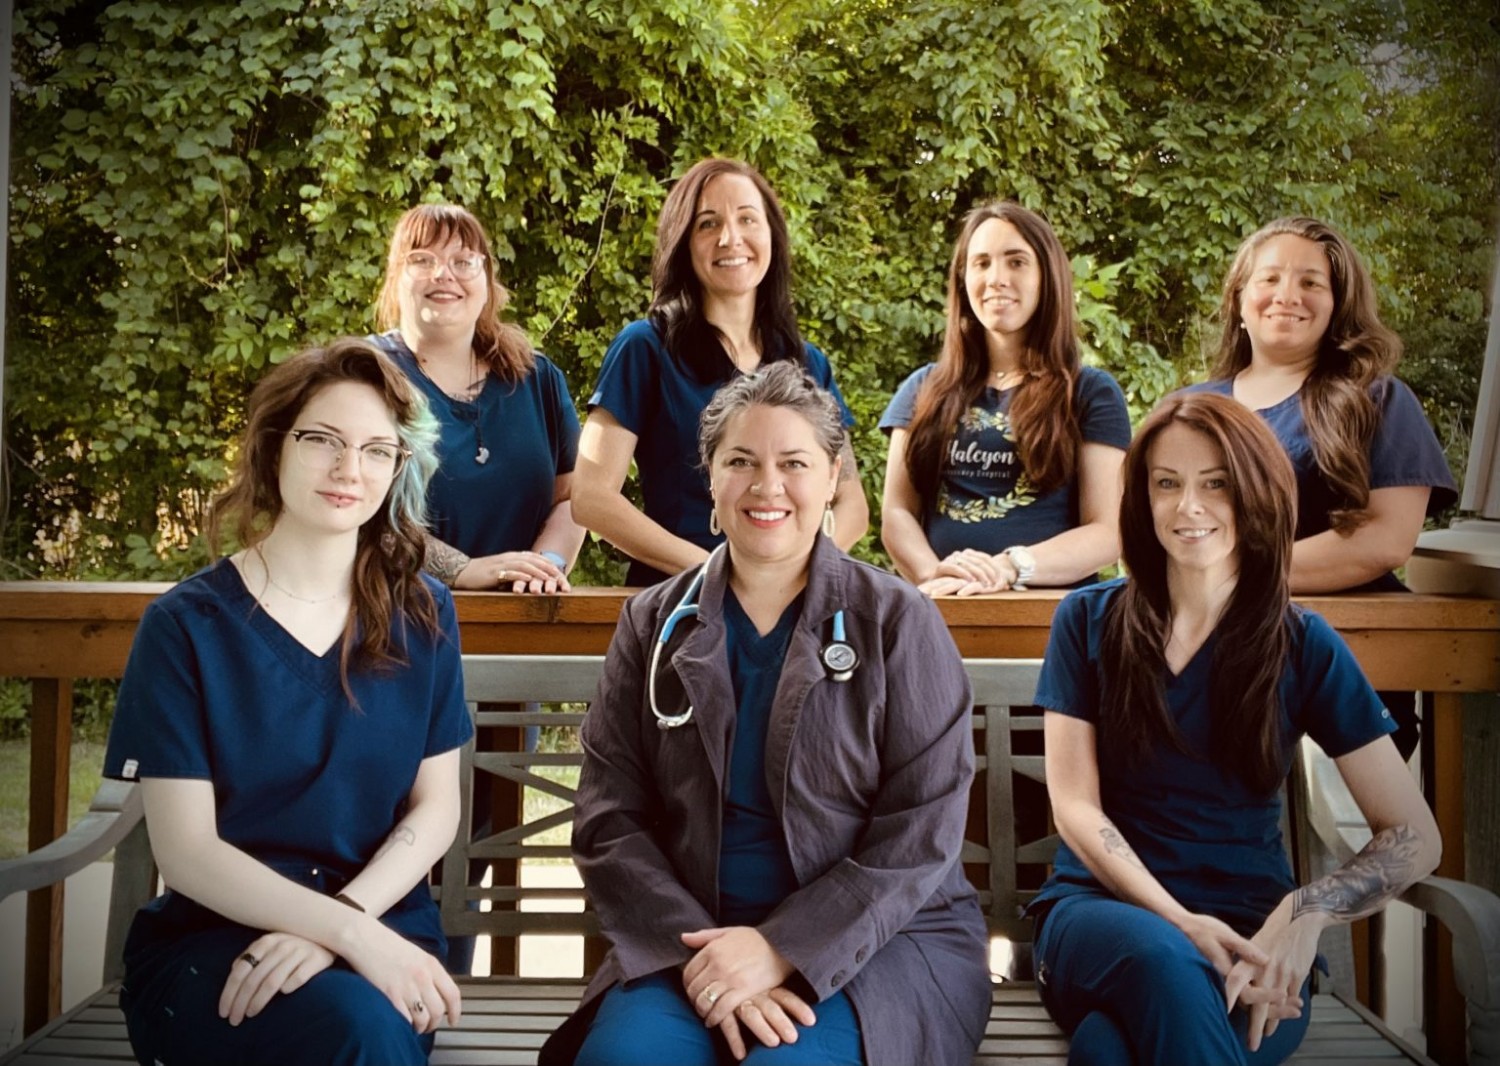 Our Staff at Halcyon Veterinary Hospital